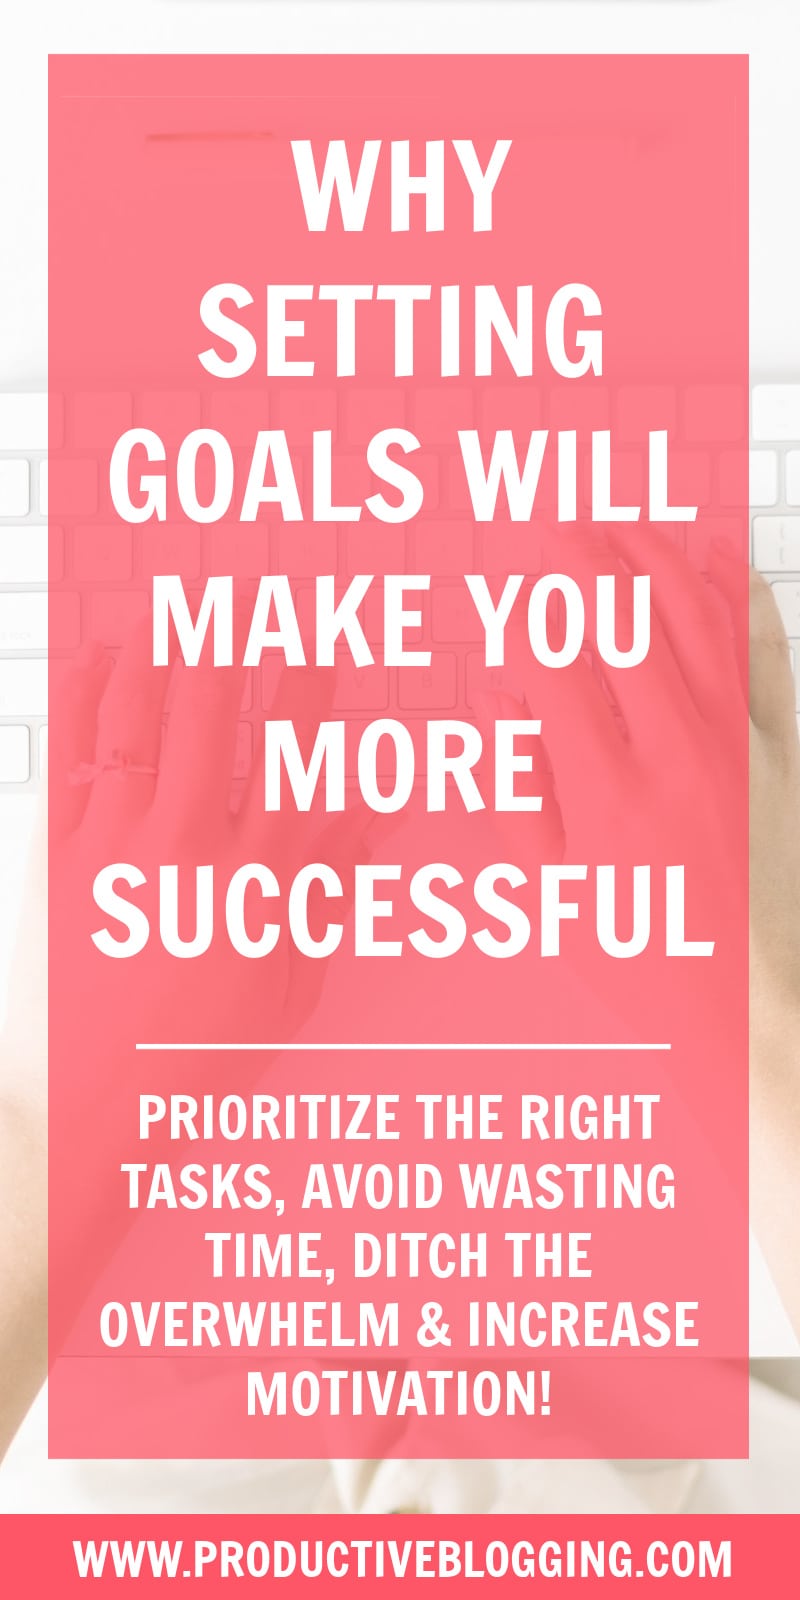 Setting goals helps you get clear on the direction your business is headed… so you can prioritize the right tasks, stay focused on what matters most and avoid wasting time on unnecessary activities. #goalsetting #settinggoals #productivity #productivityhabits #productivityhacks #boostproductivity #blogplanning #planning #timemanagement #goals #blogginggoals #blog #blogging #blogger #bloggingtips #organized #productivitytips #productiveblogging #blogsmarternotharder #worksmarternotharder